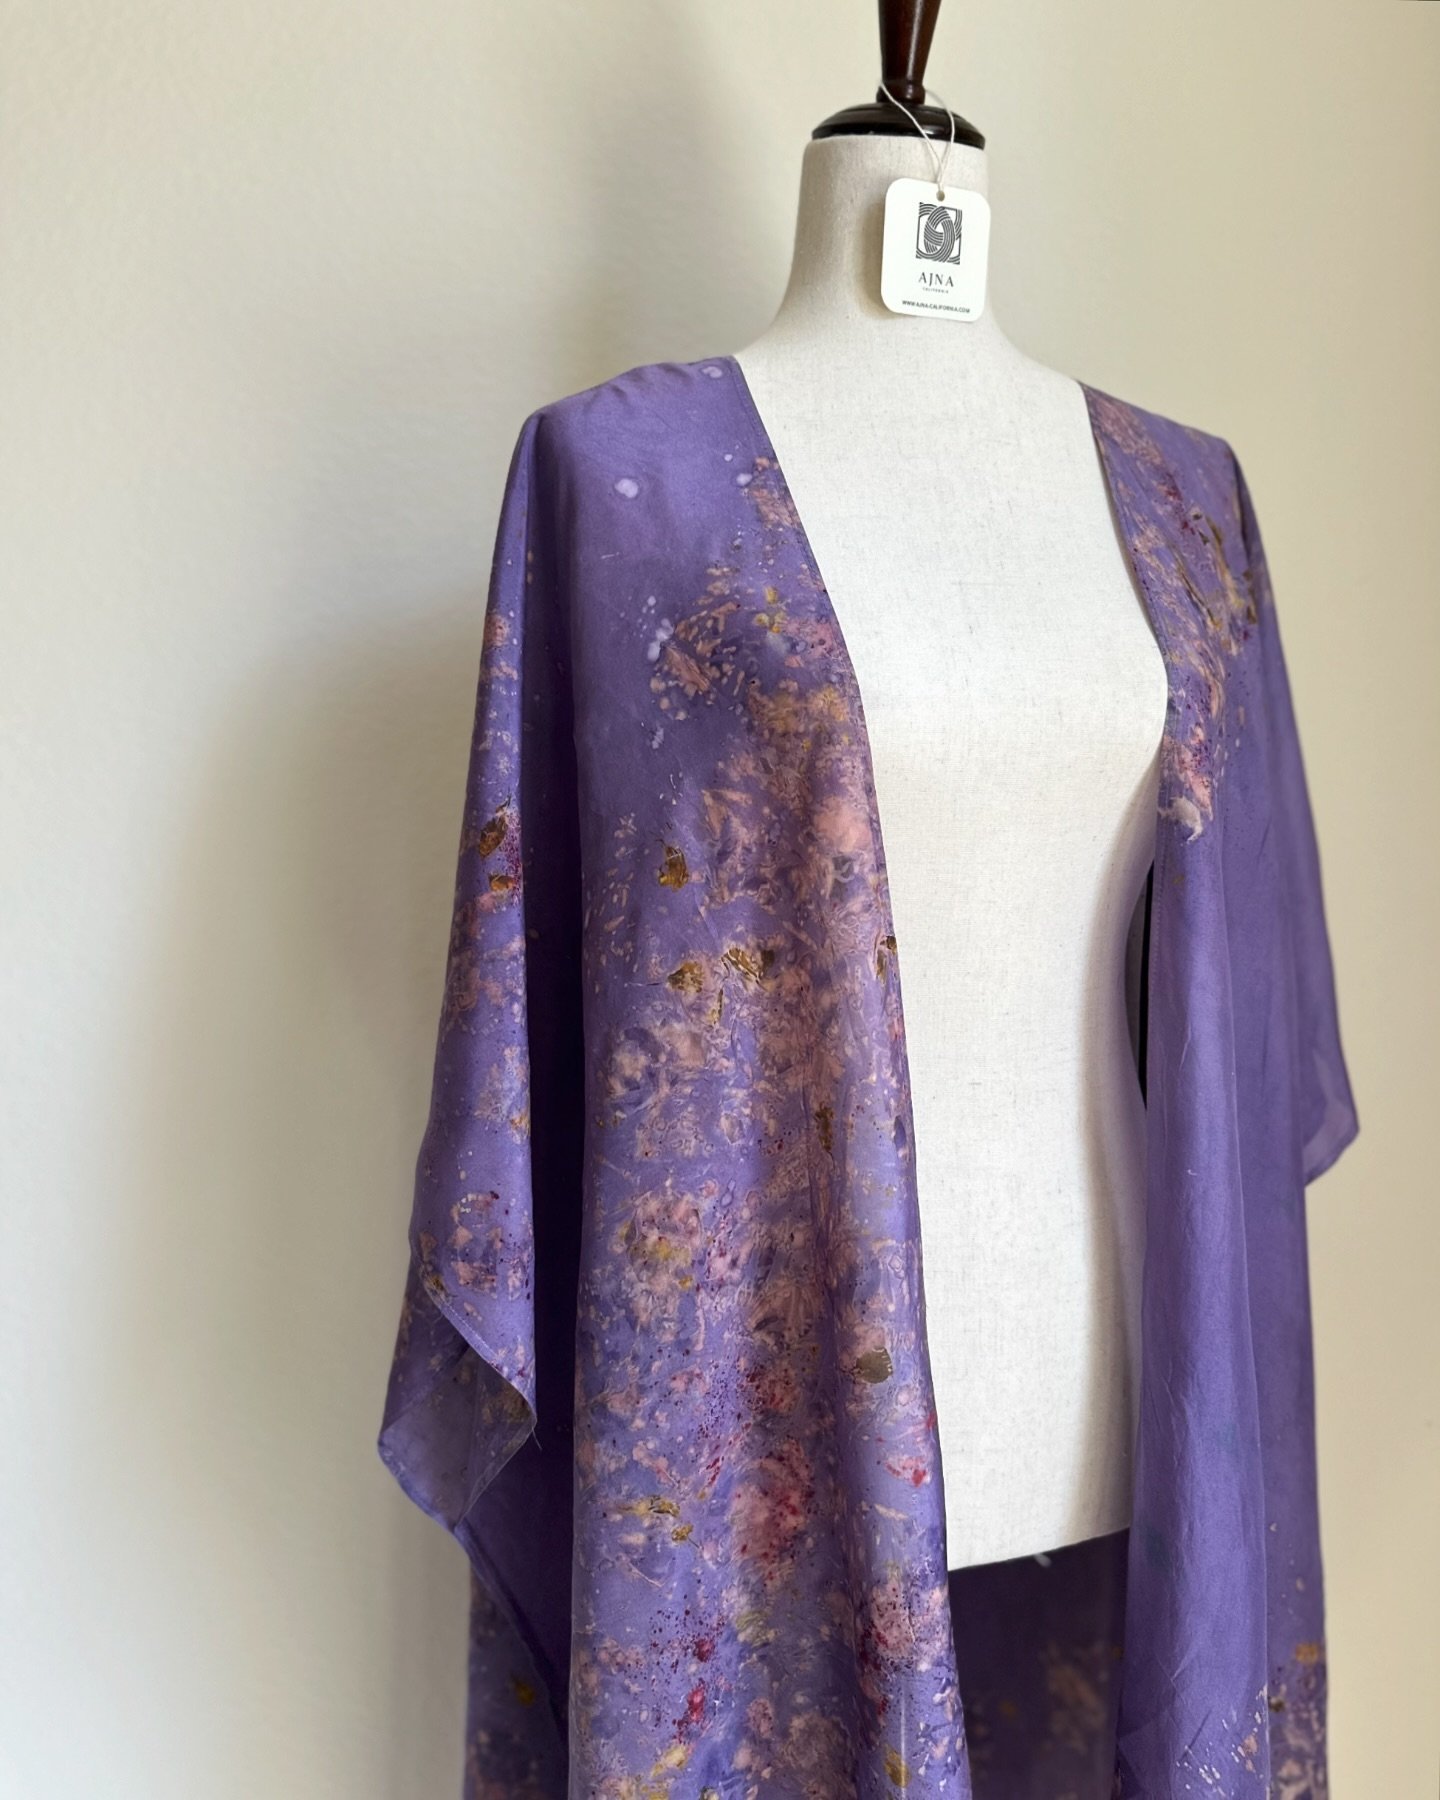 Botanically dyed silk duster top 🪻
This is what I call the 90&rsquo;s purple!

#botanicallydyed #silkduster #oneofakind #90spurple #ajnacalifornia #shoplocalsj